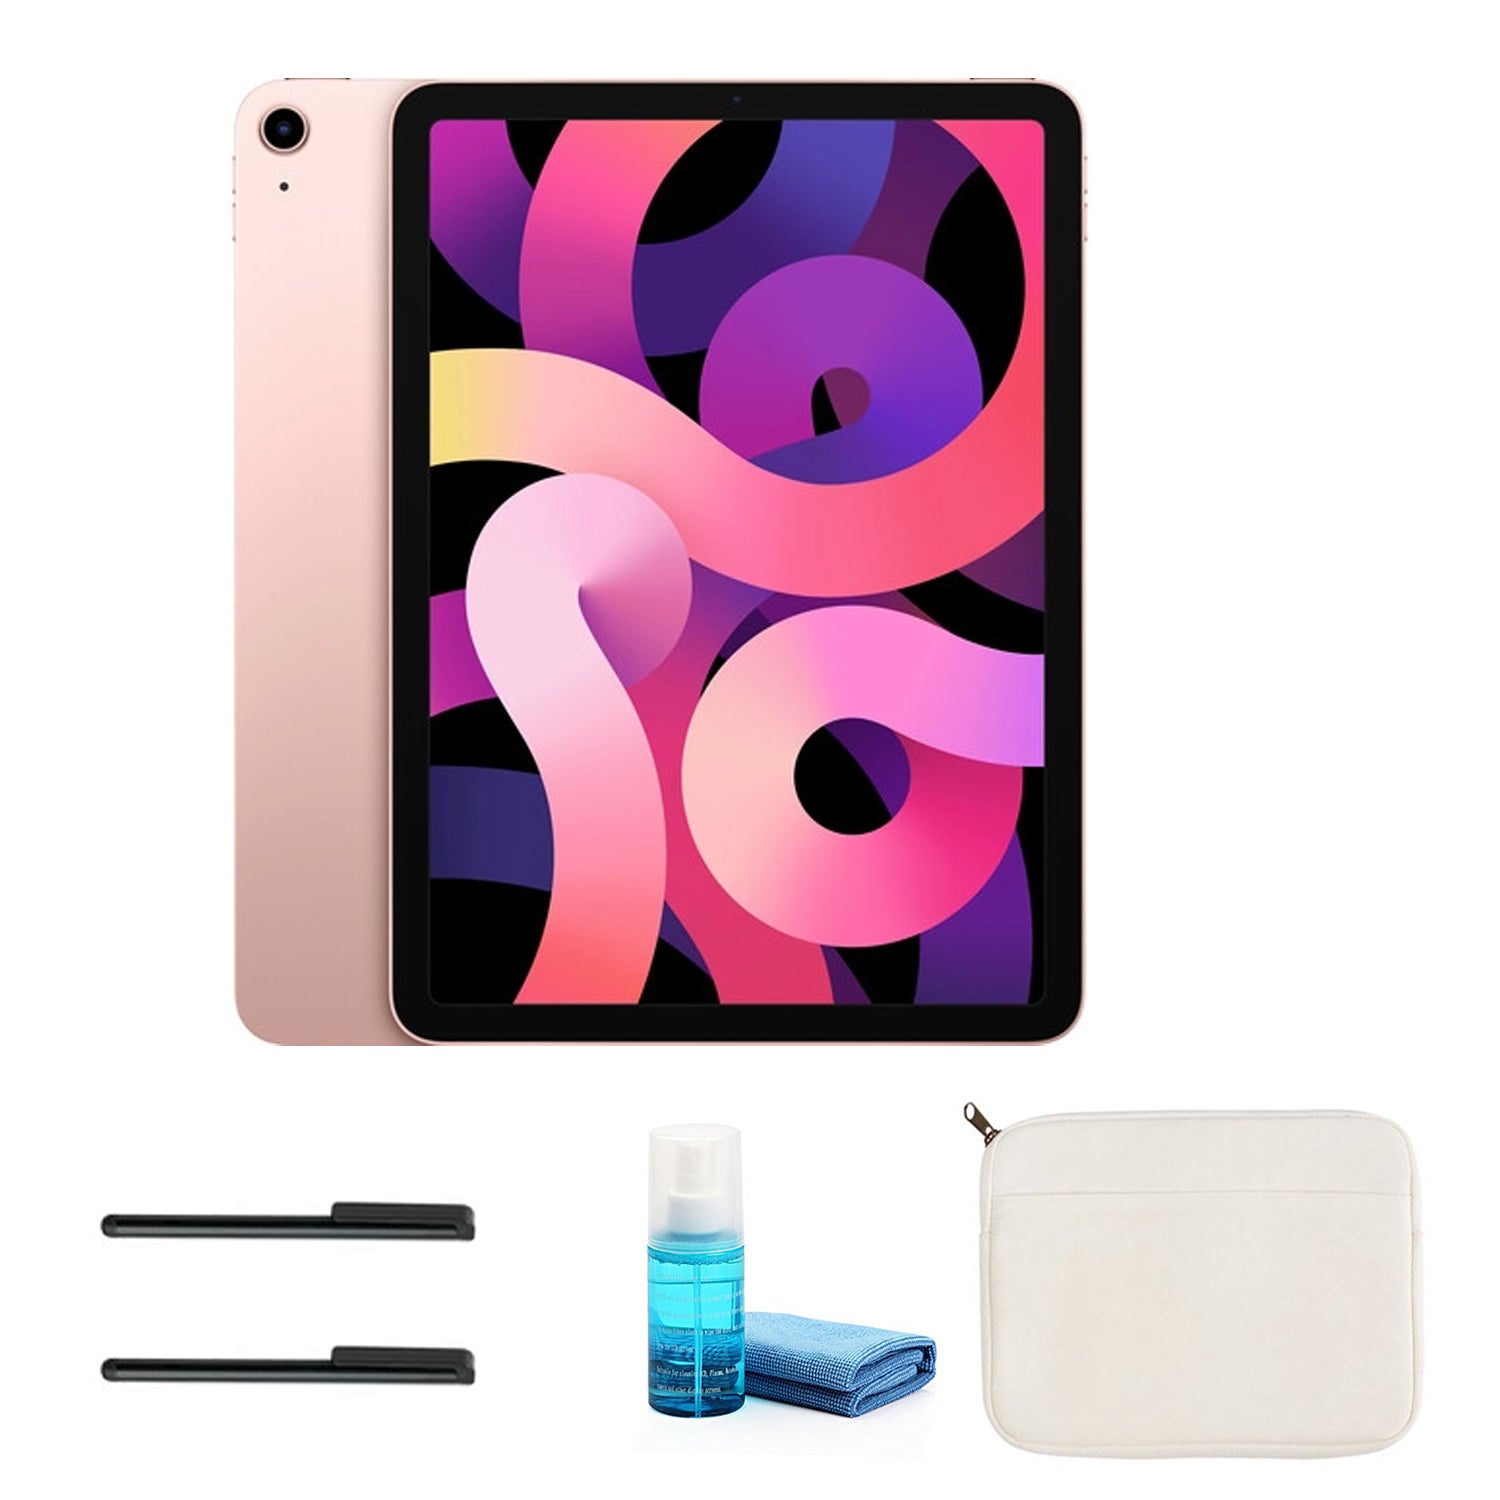 Apple iPad Air 10.9 Inch (64GB, Wi-Fi Only, Rose Gold)) with White Sleeve Bundle